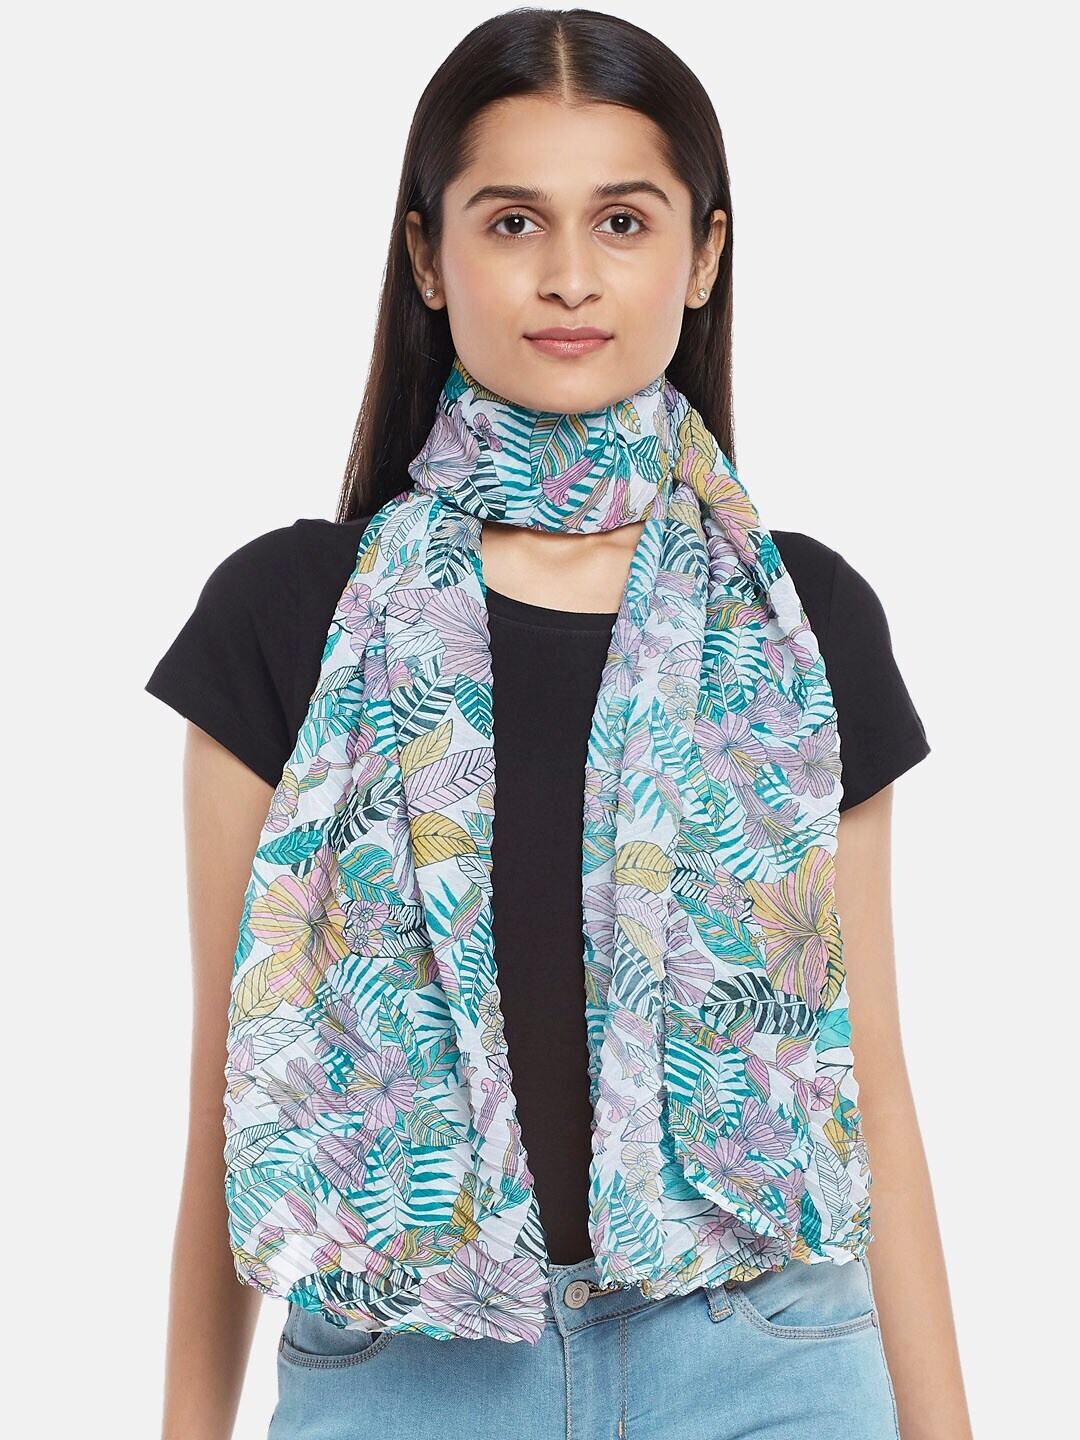 Honey by Pantaloons Women Green & Blue Scarf Price in India